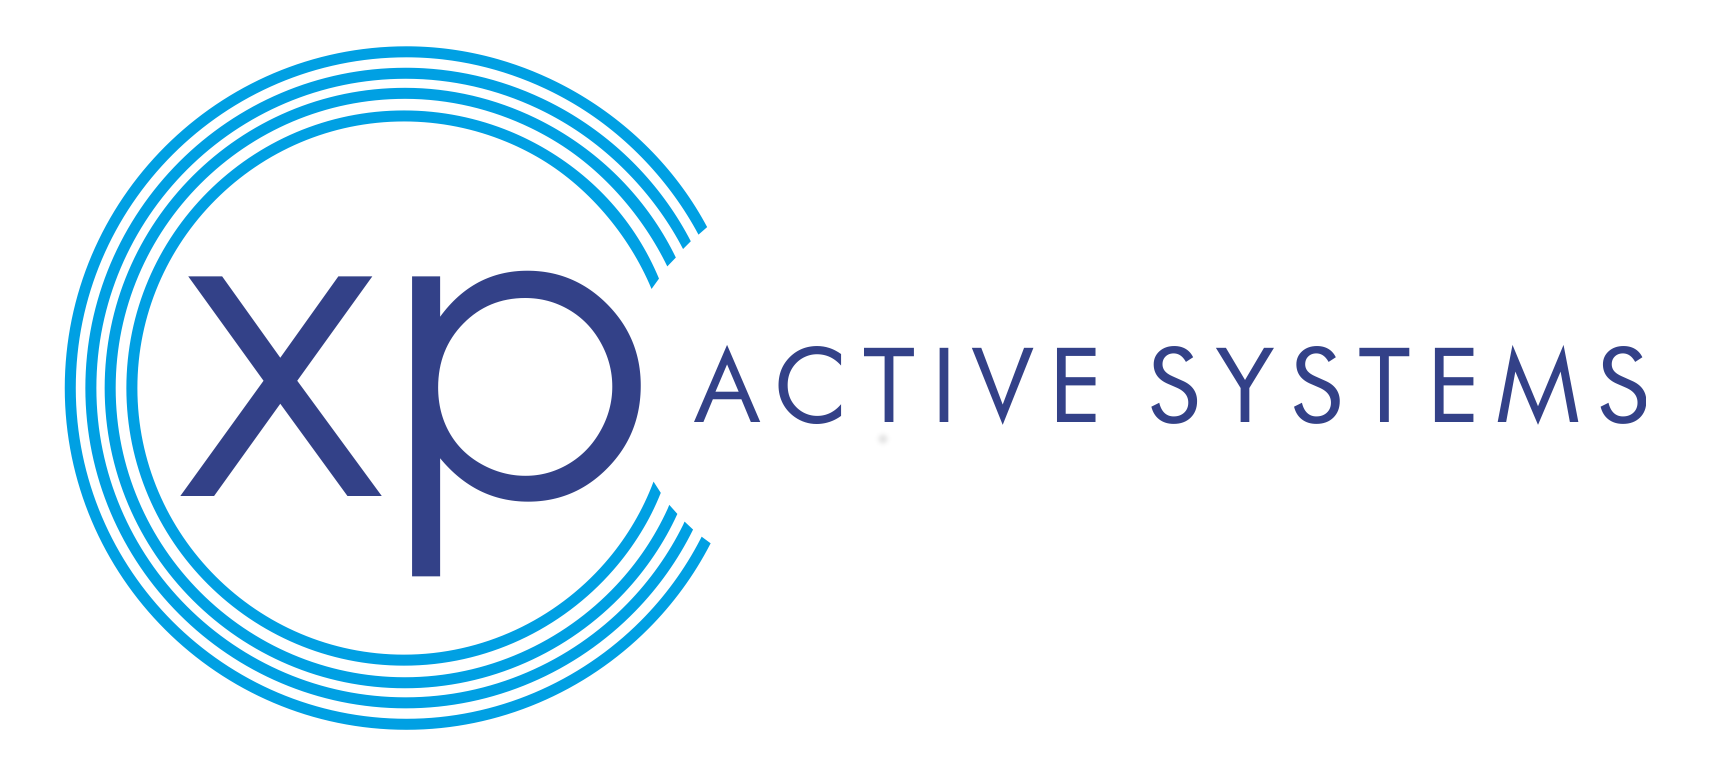 XPS - XP Active Systems